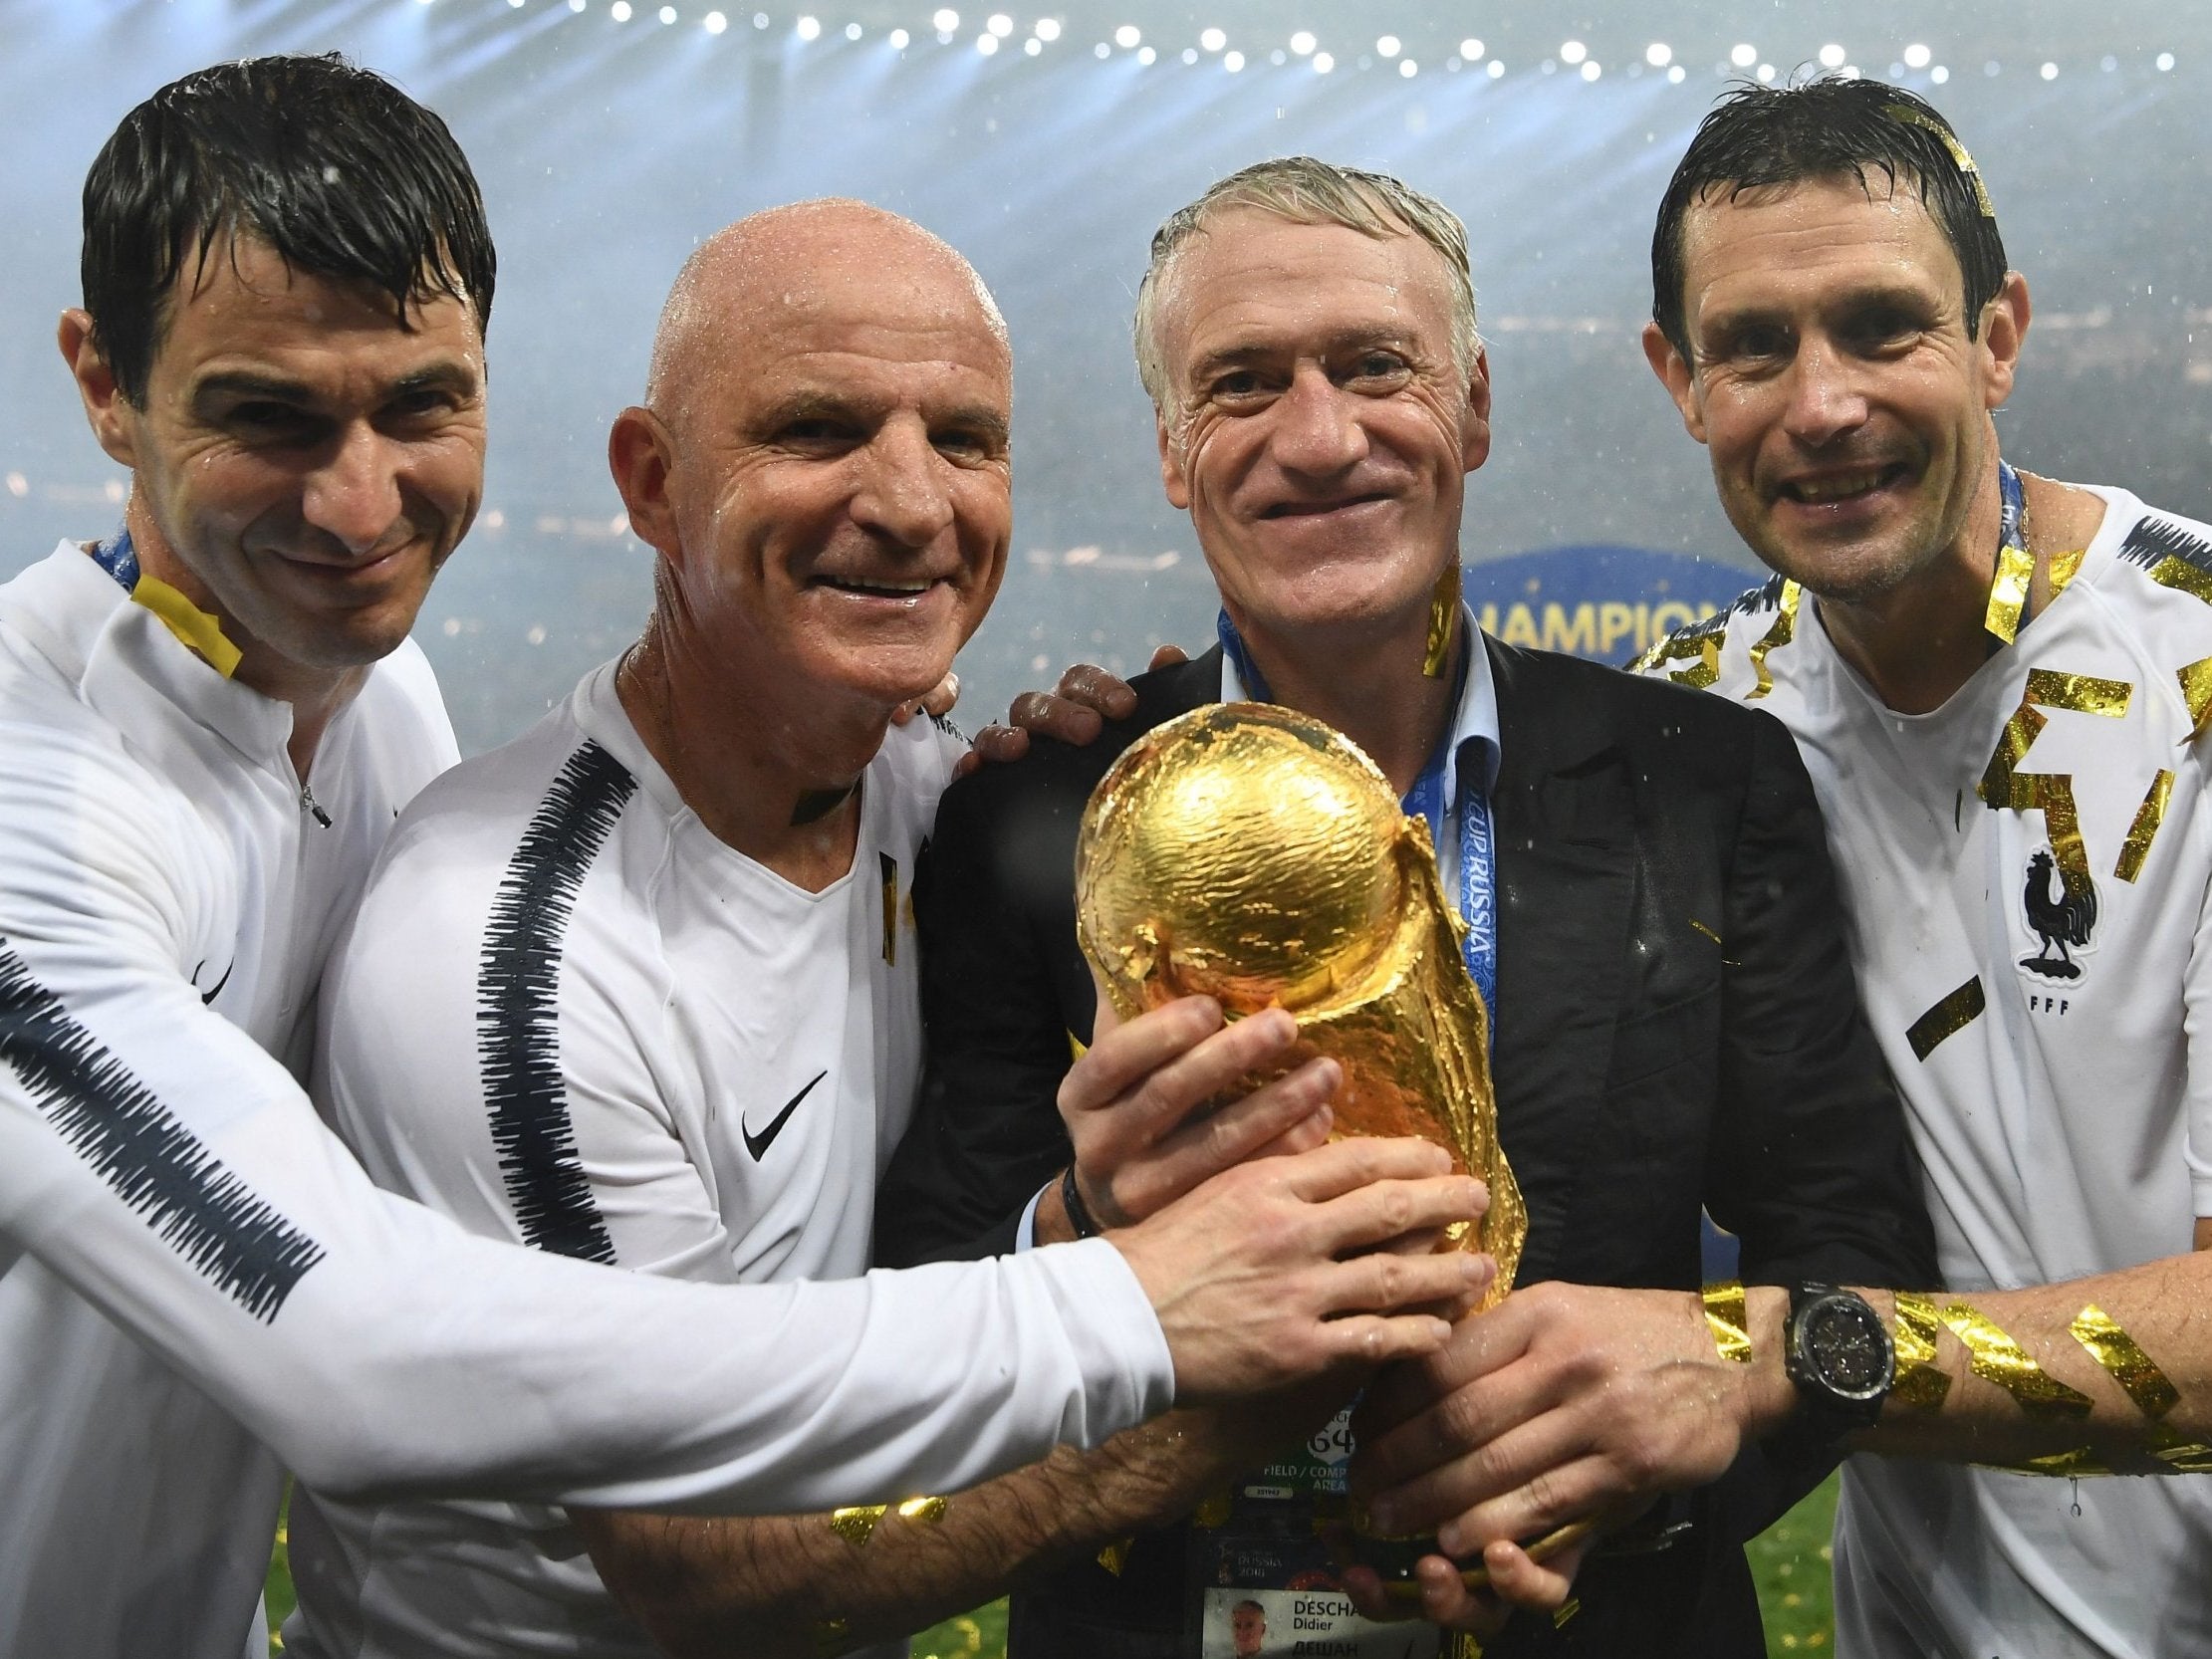 Deschamps won the World Cup with France this summer